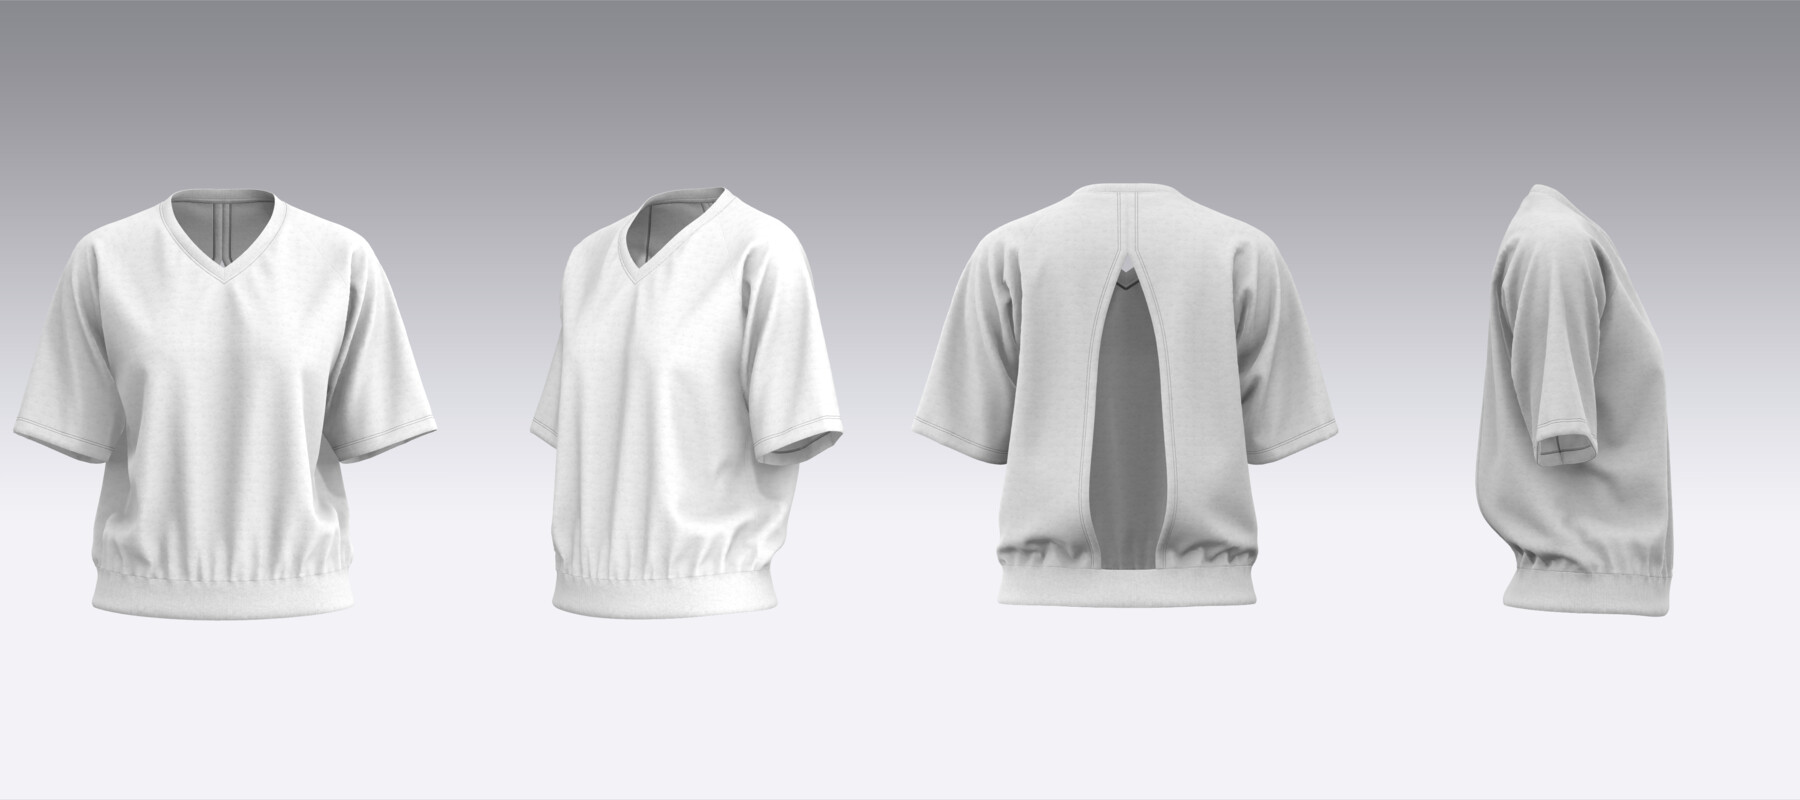 ArtStation - T-shirt with open back detail | Resources